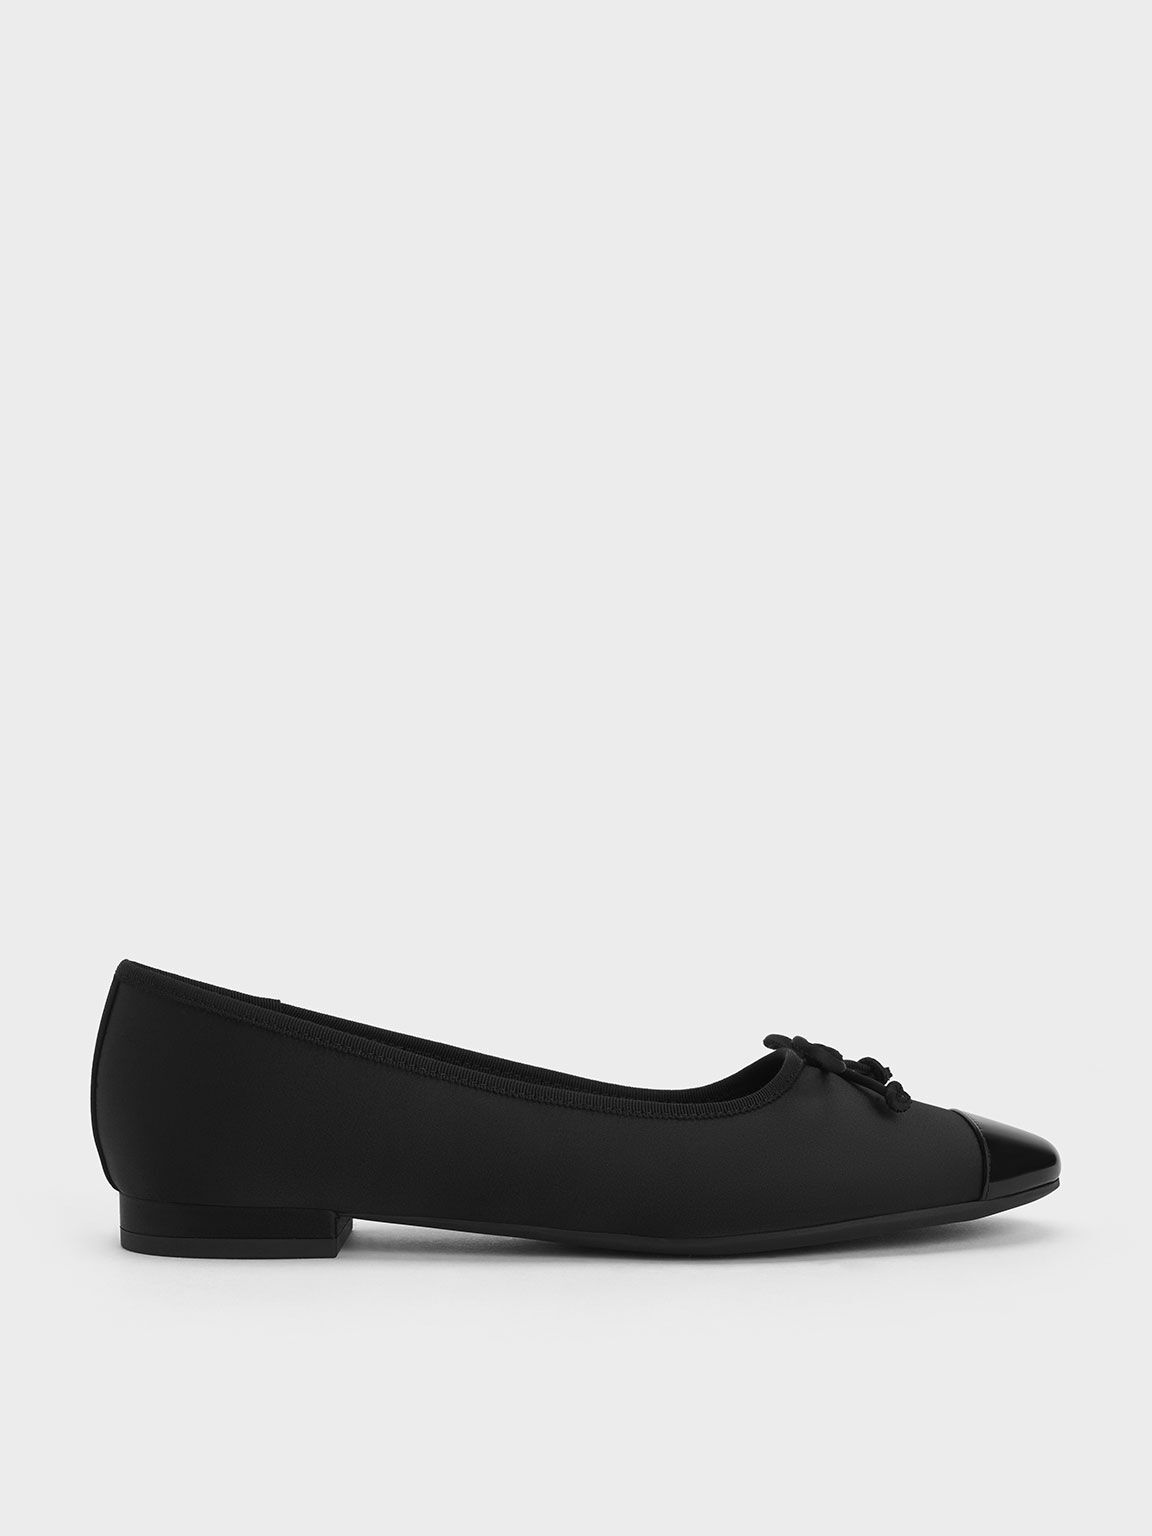 Black Textured Recycled Polyester Bow Ballet Flats - CHARLES & KEITH MY